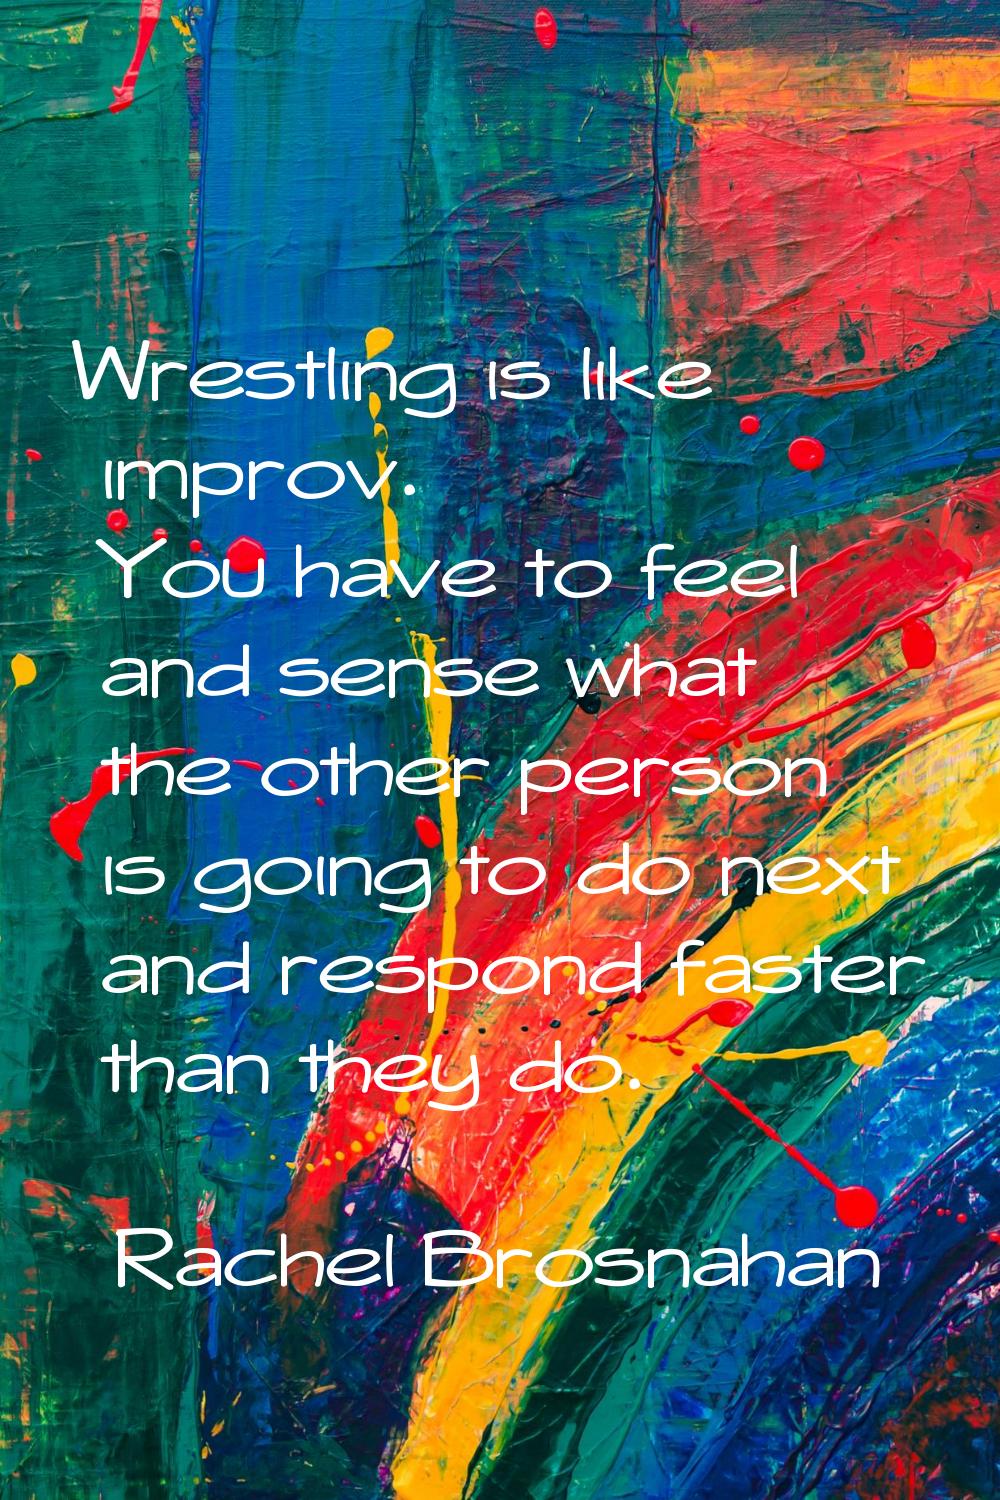 Wrestling is like improv. You have to feel and sense what the other person is going to do next and 